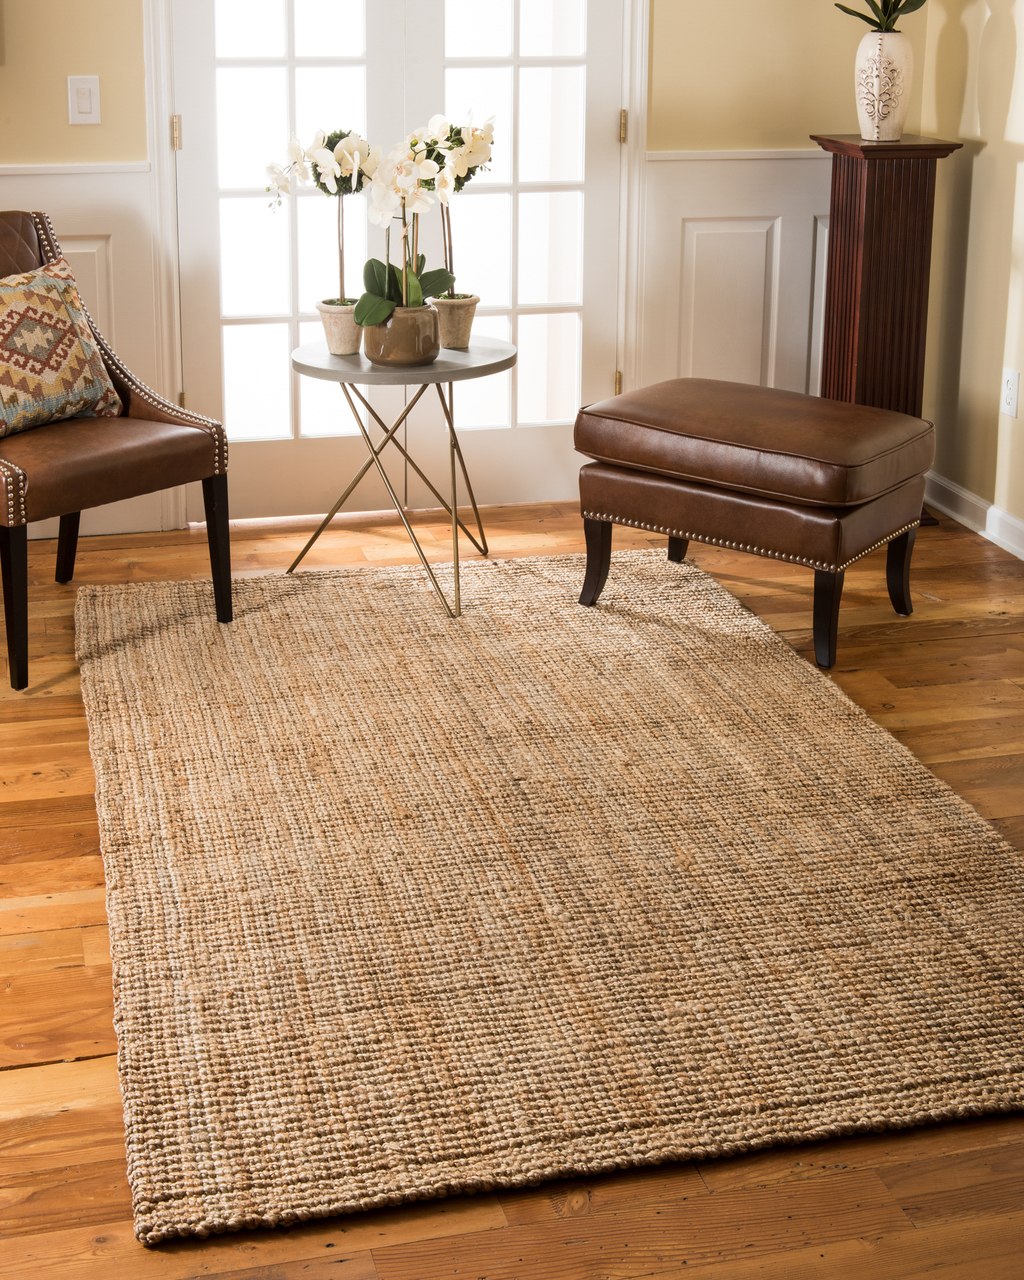 ... image alt text: chambers jute rug; earth friendly: yes; handmade: yes; VMQROOH